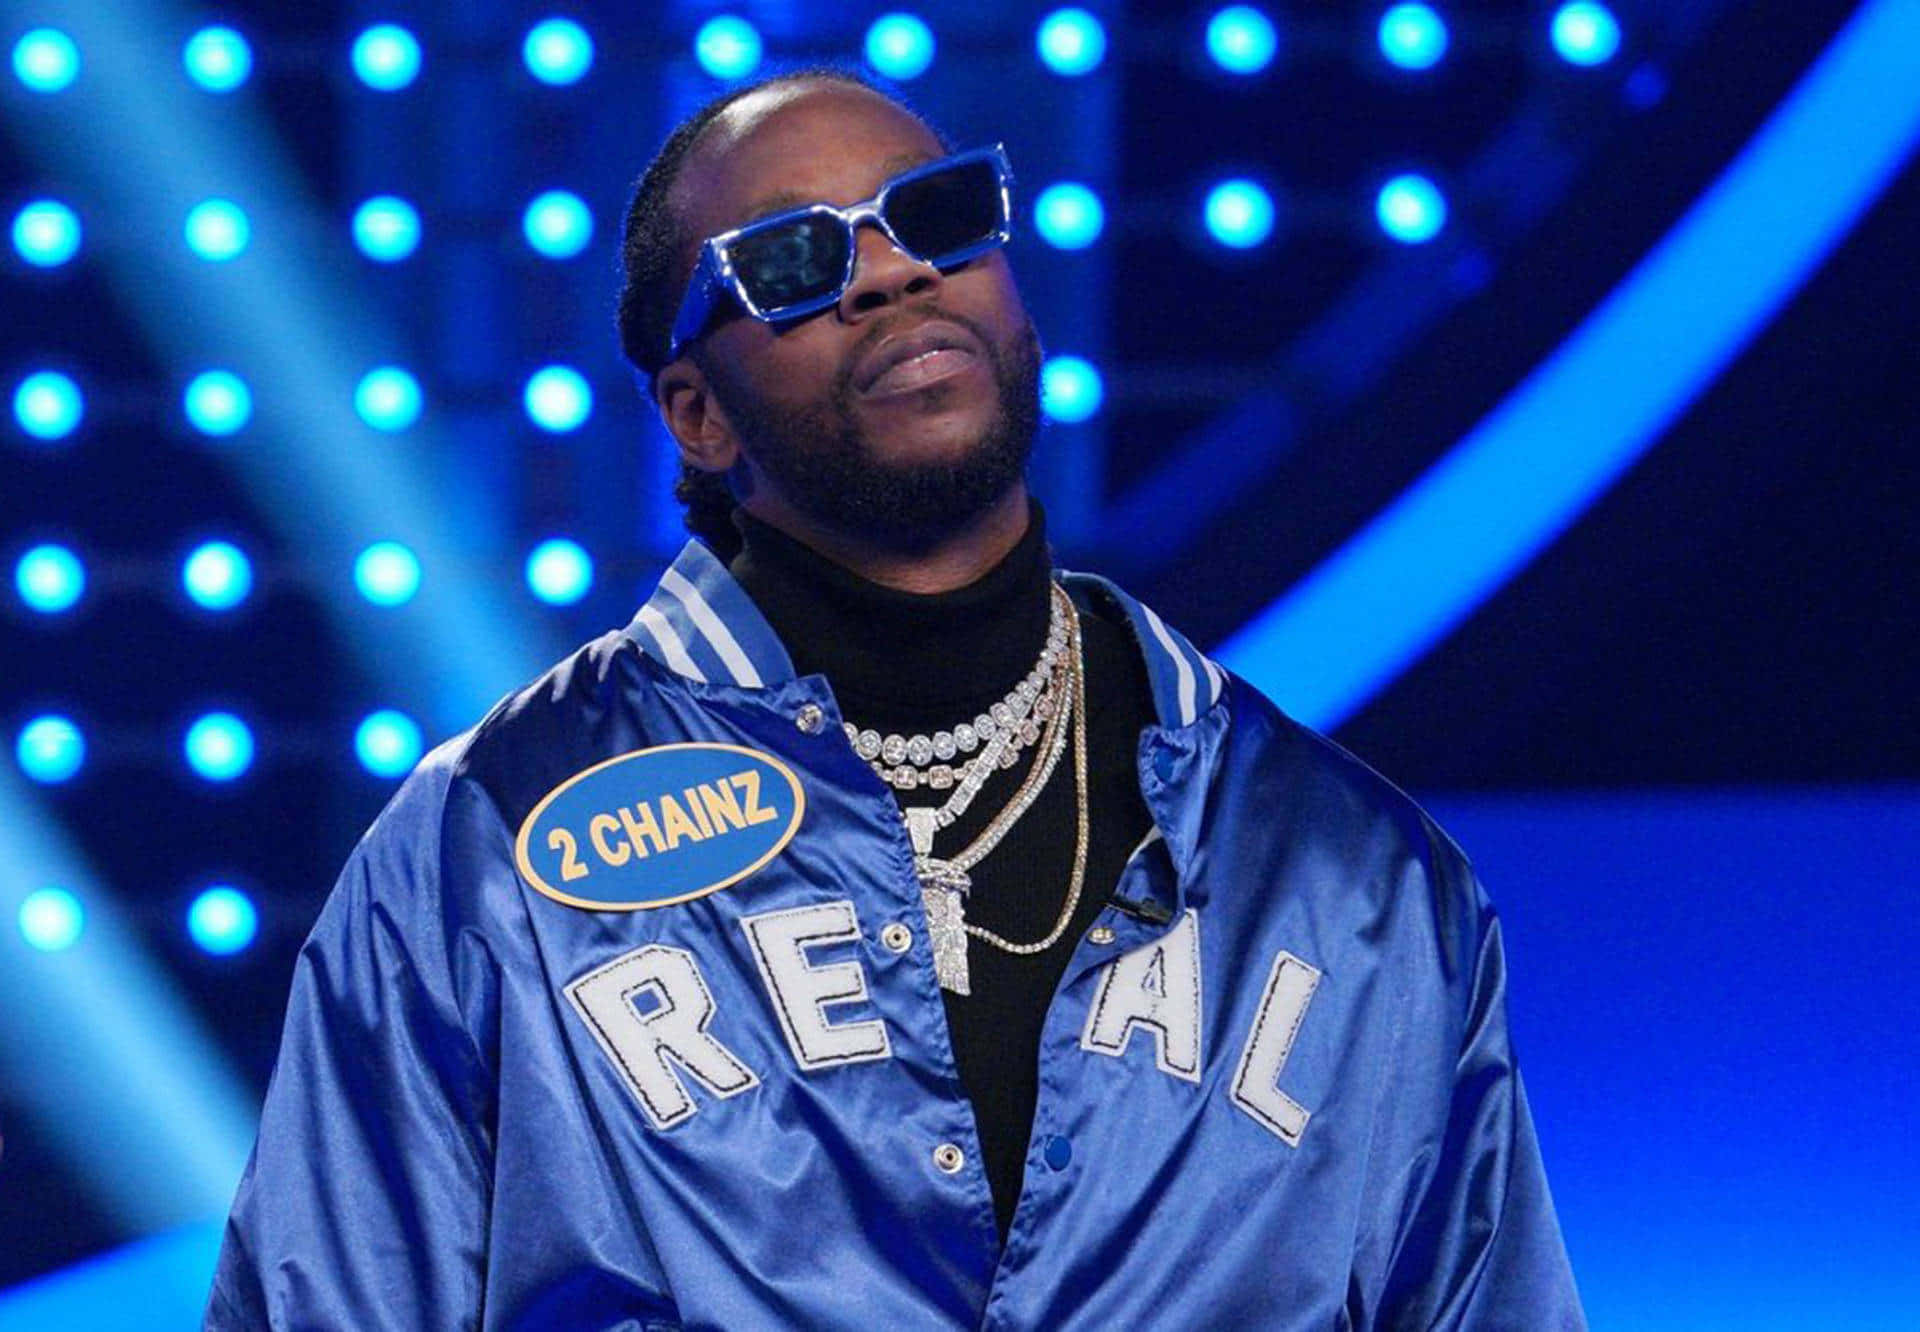 2 Chainz exudes confidence in front of the camera